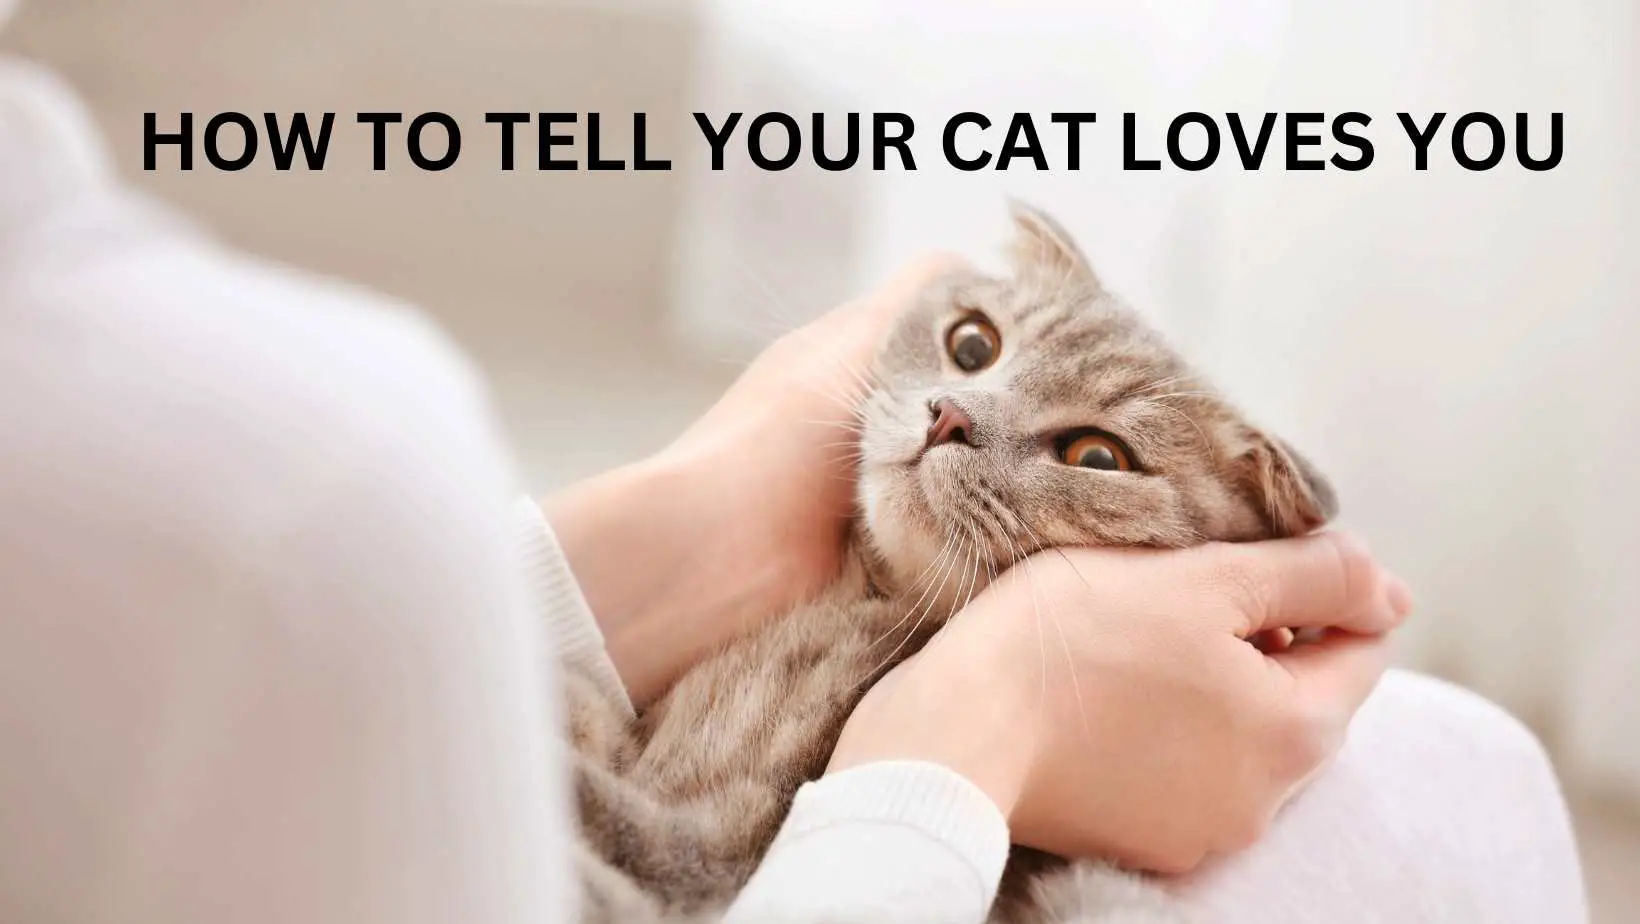 How to Tell Your Cat Loves You